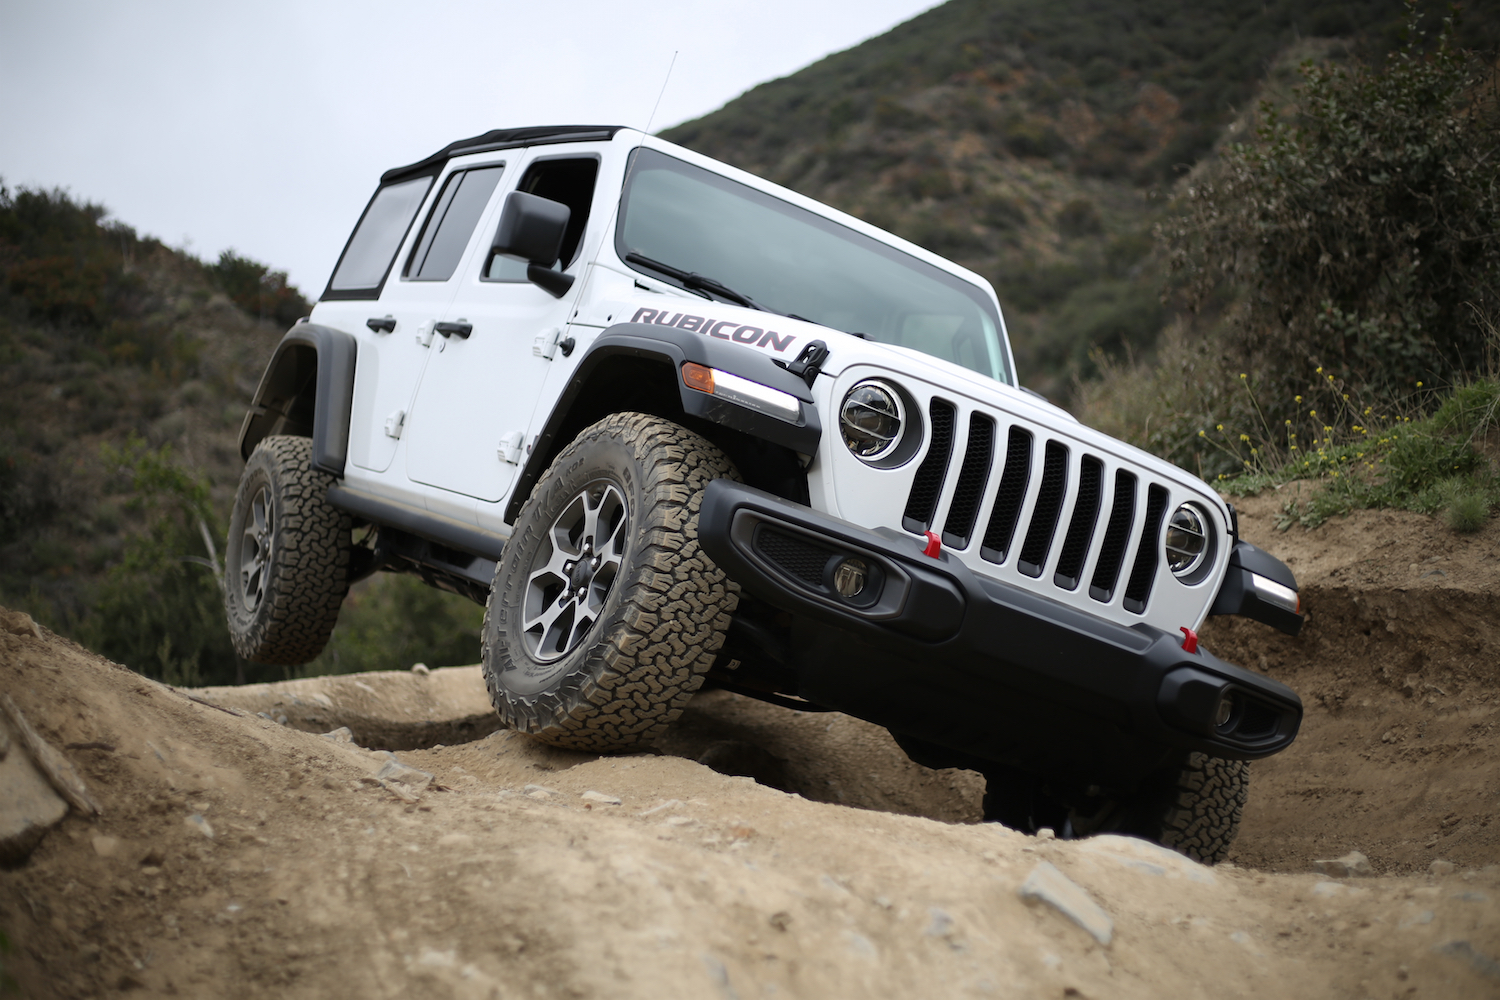 2018 Jeep Wrangler JLU Rubicon Review Pictures, Video, Specs